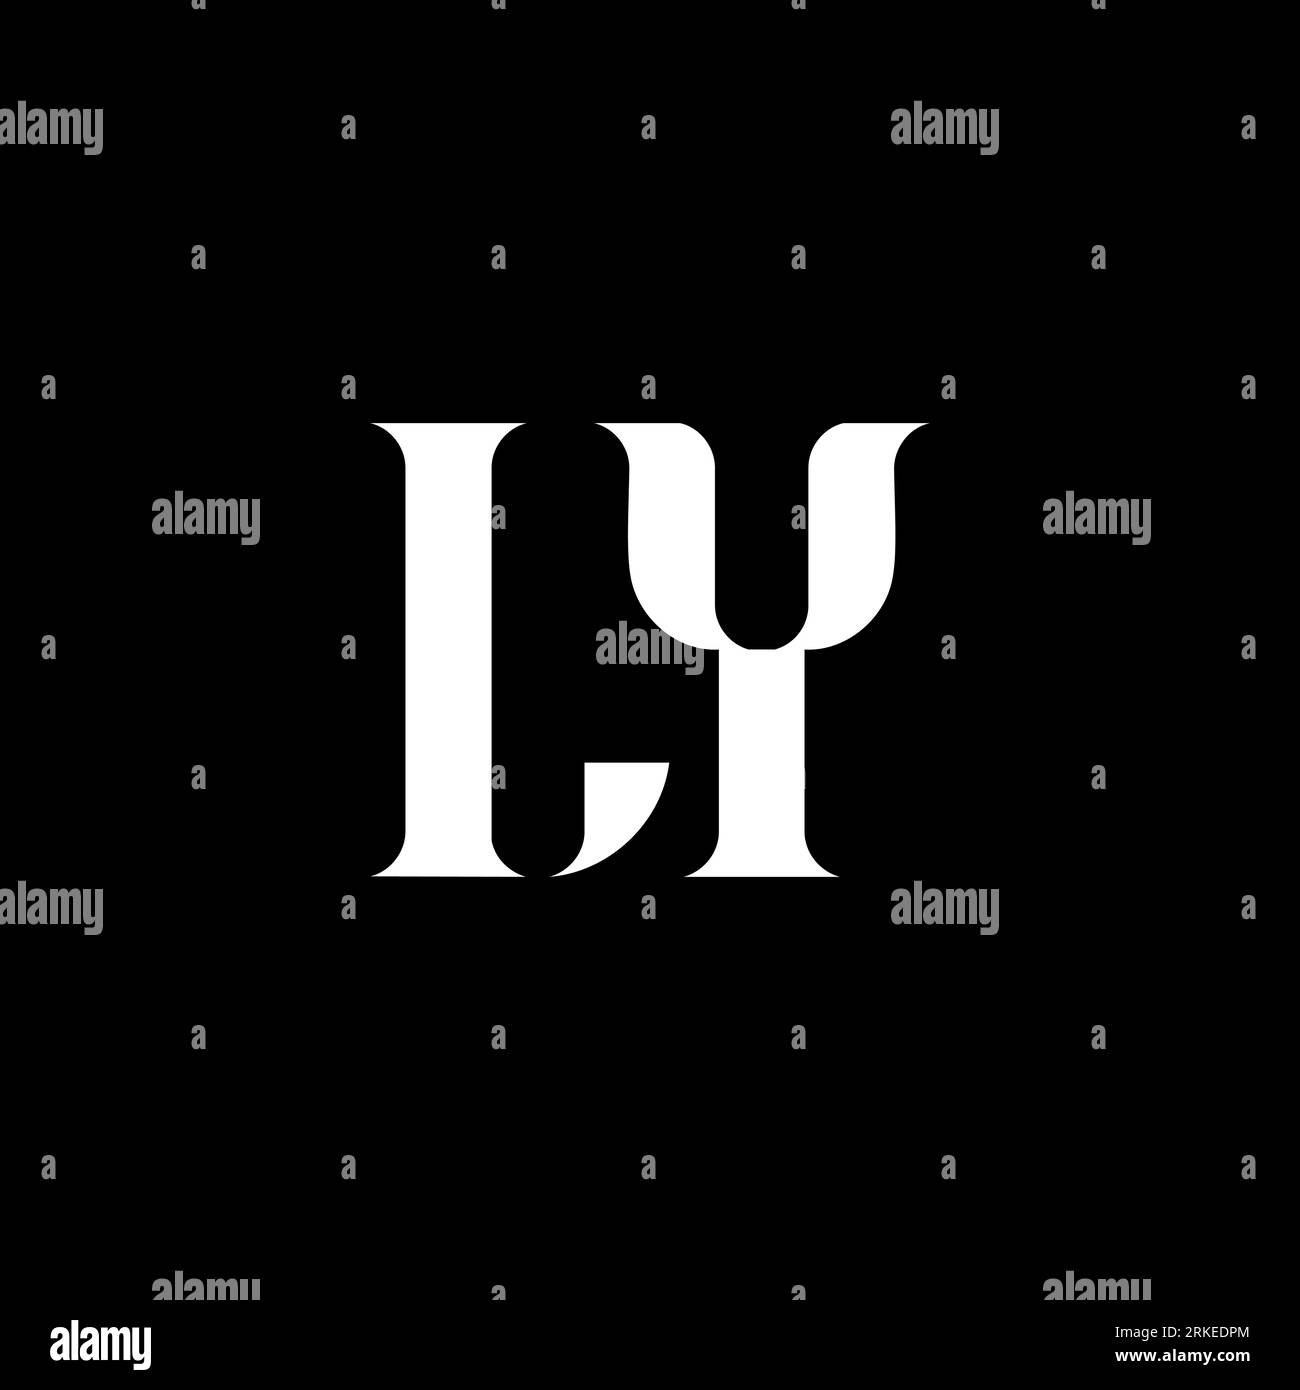 Yl letters Black and White Stock Photos & Images - Alamy